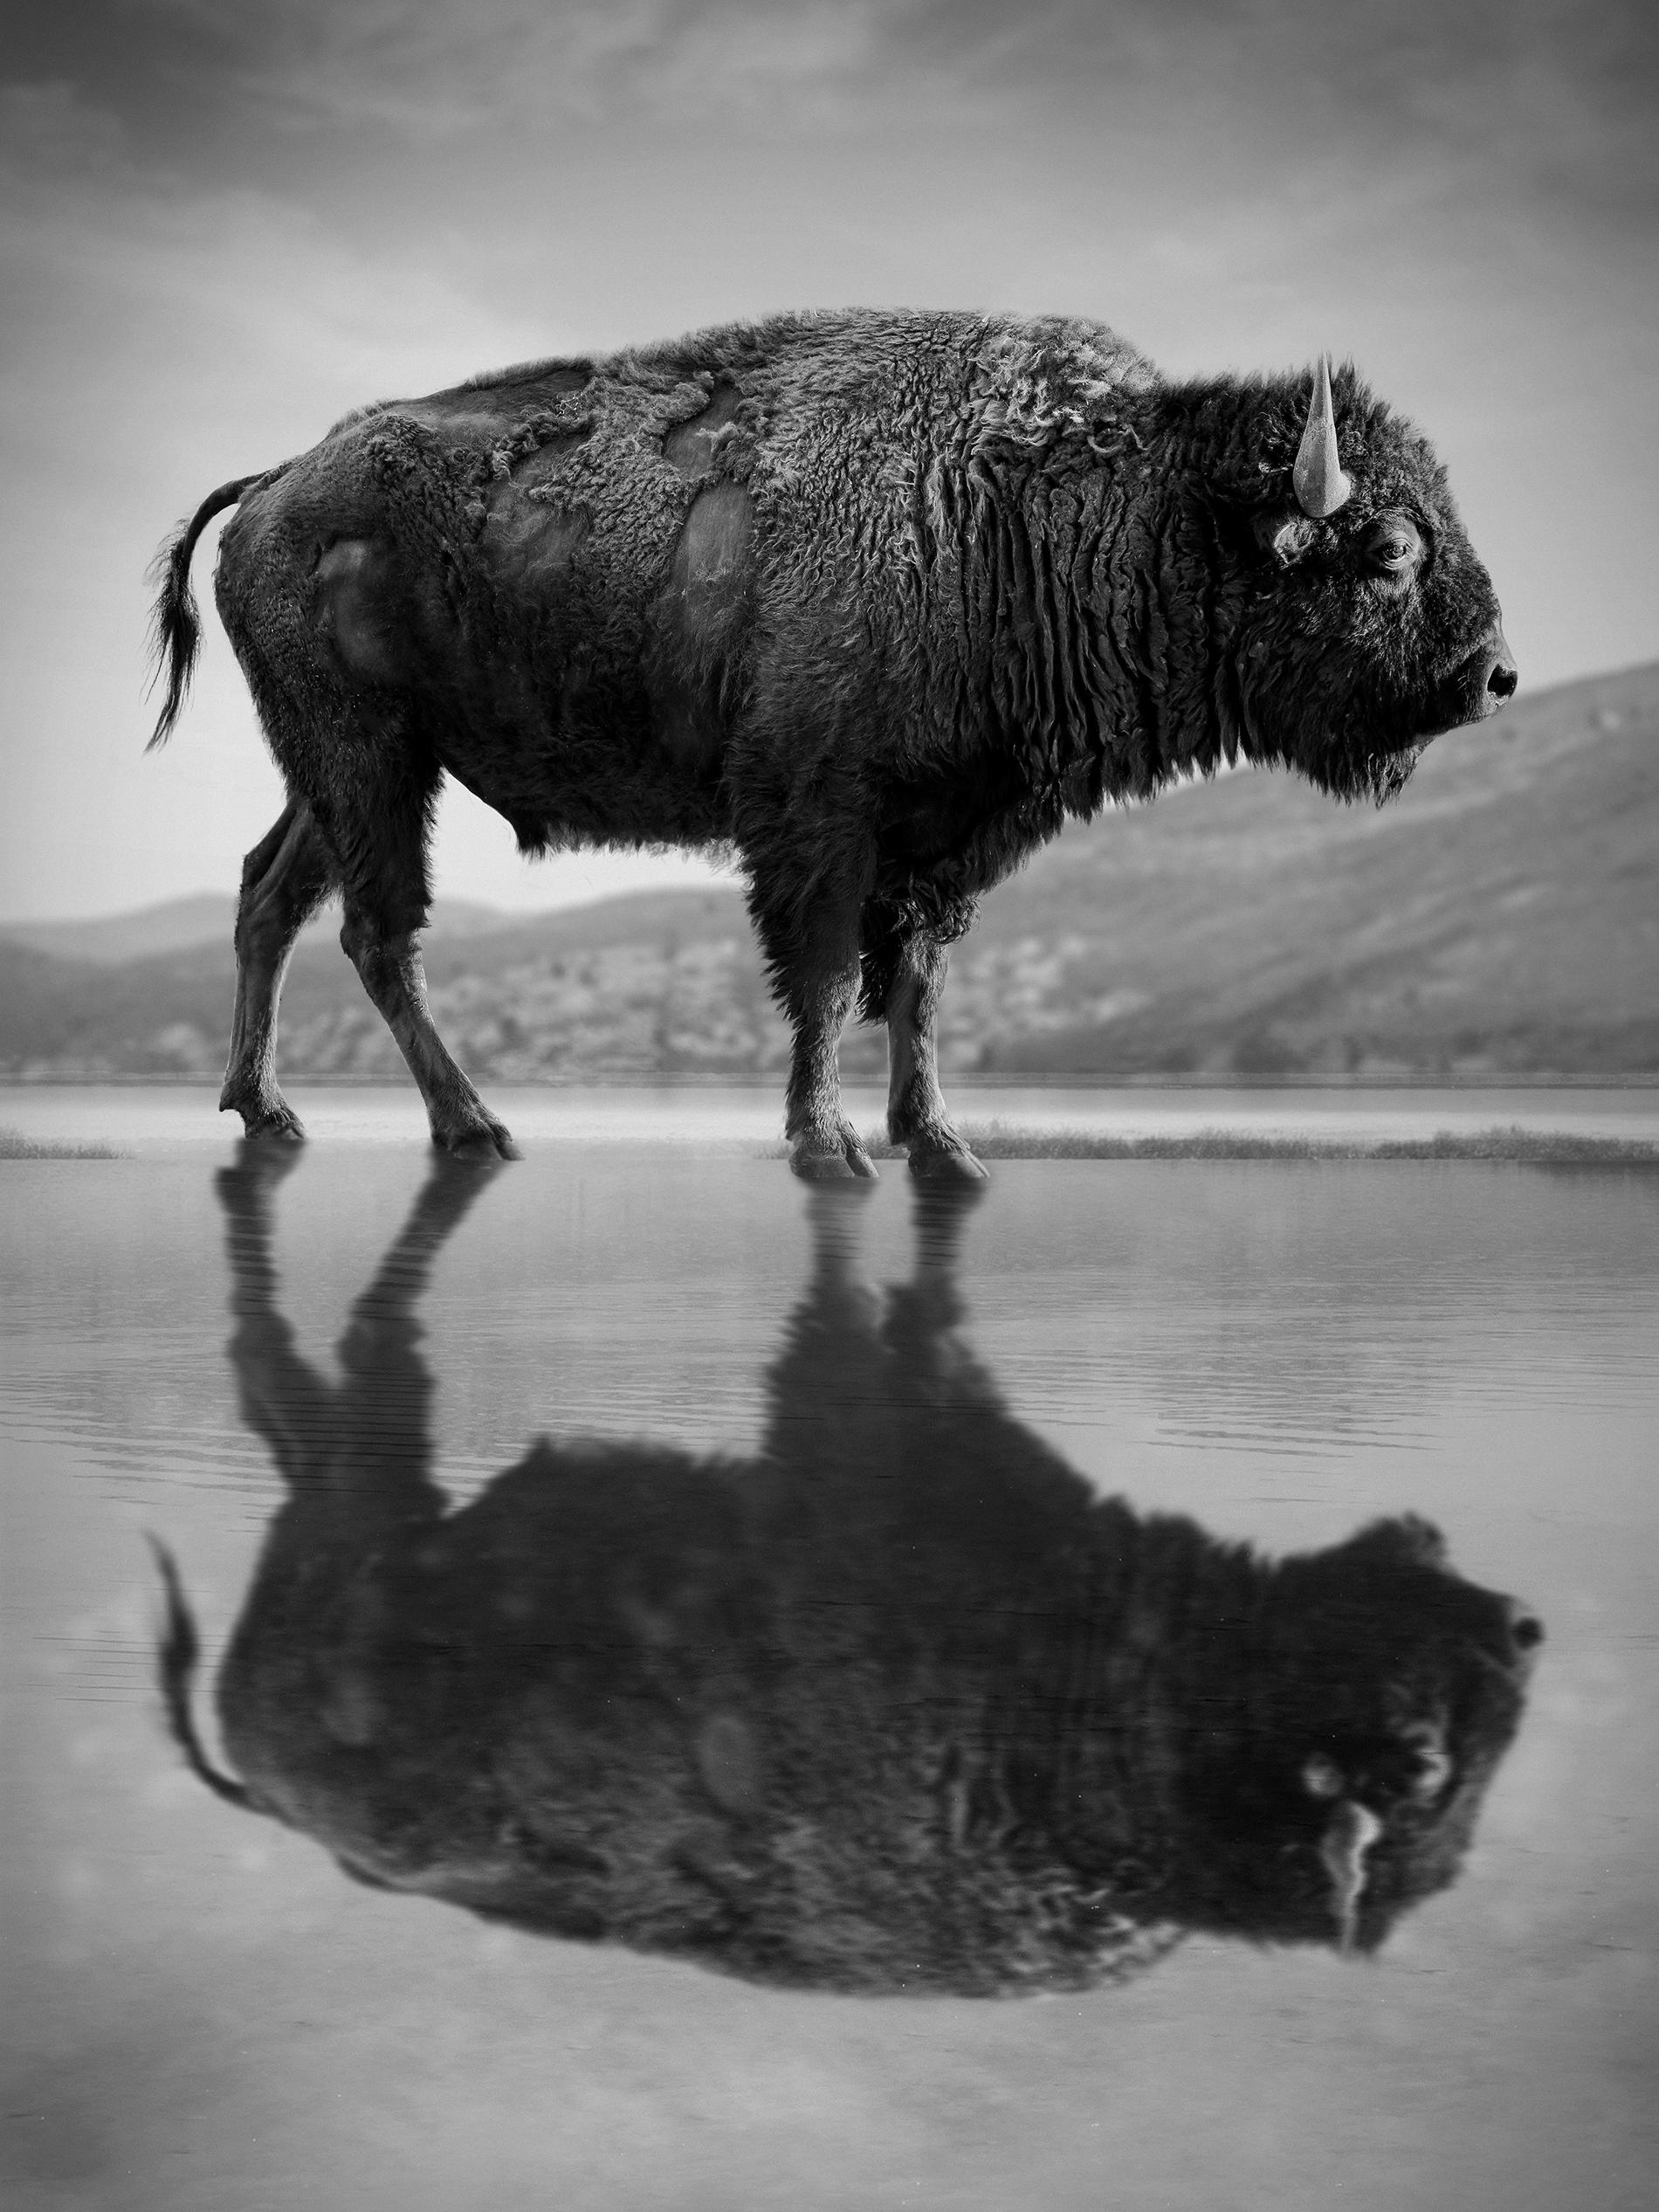 Shane Russeck Black and White Photograph - Black & White Photography Bison  "Old World" 75x50 Buffalo Signed Photograph